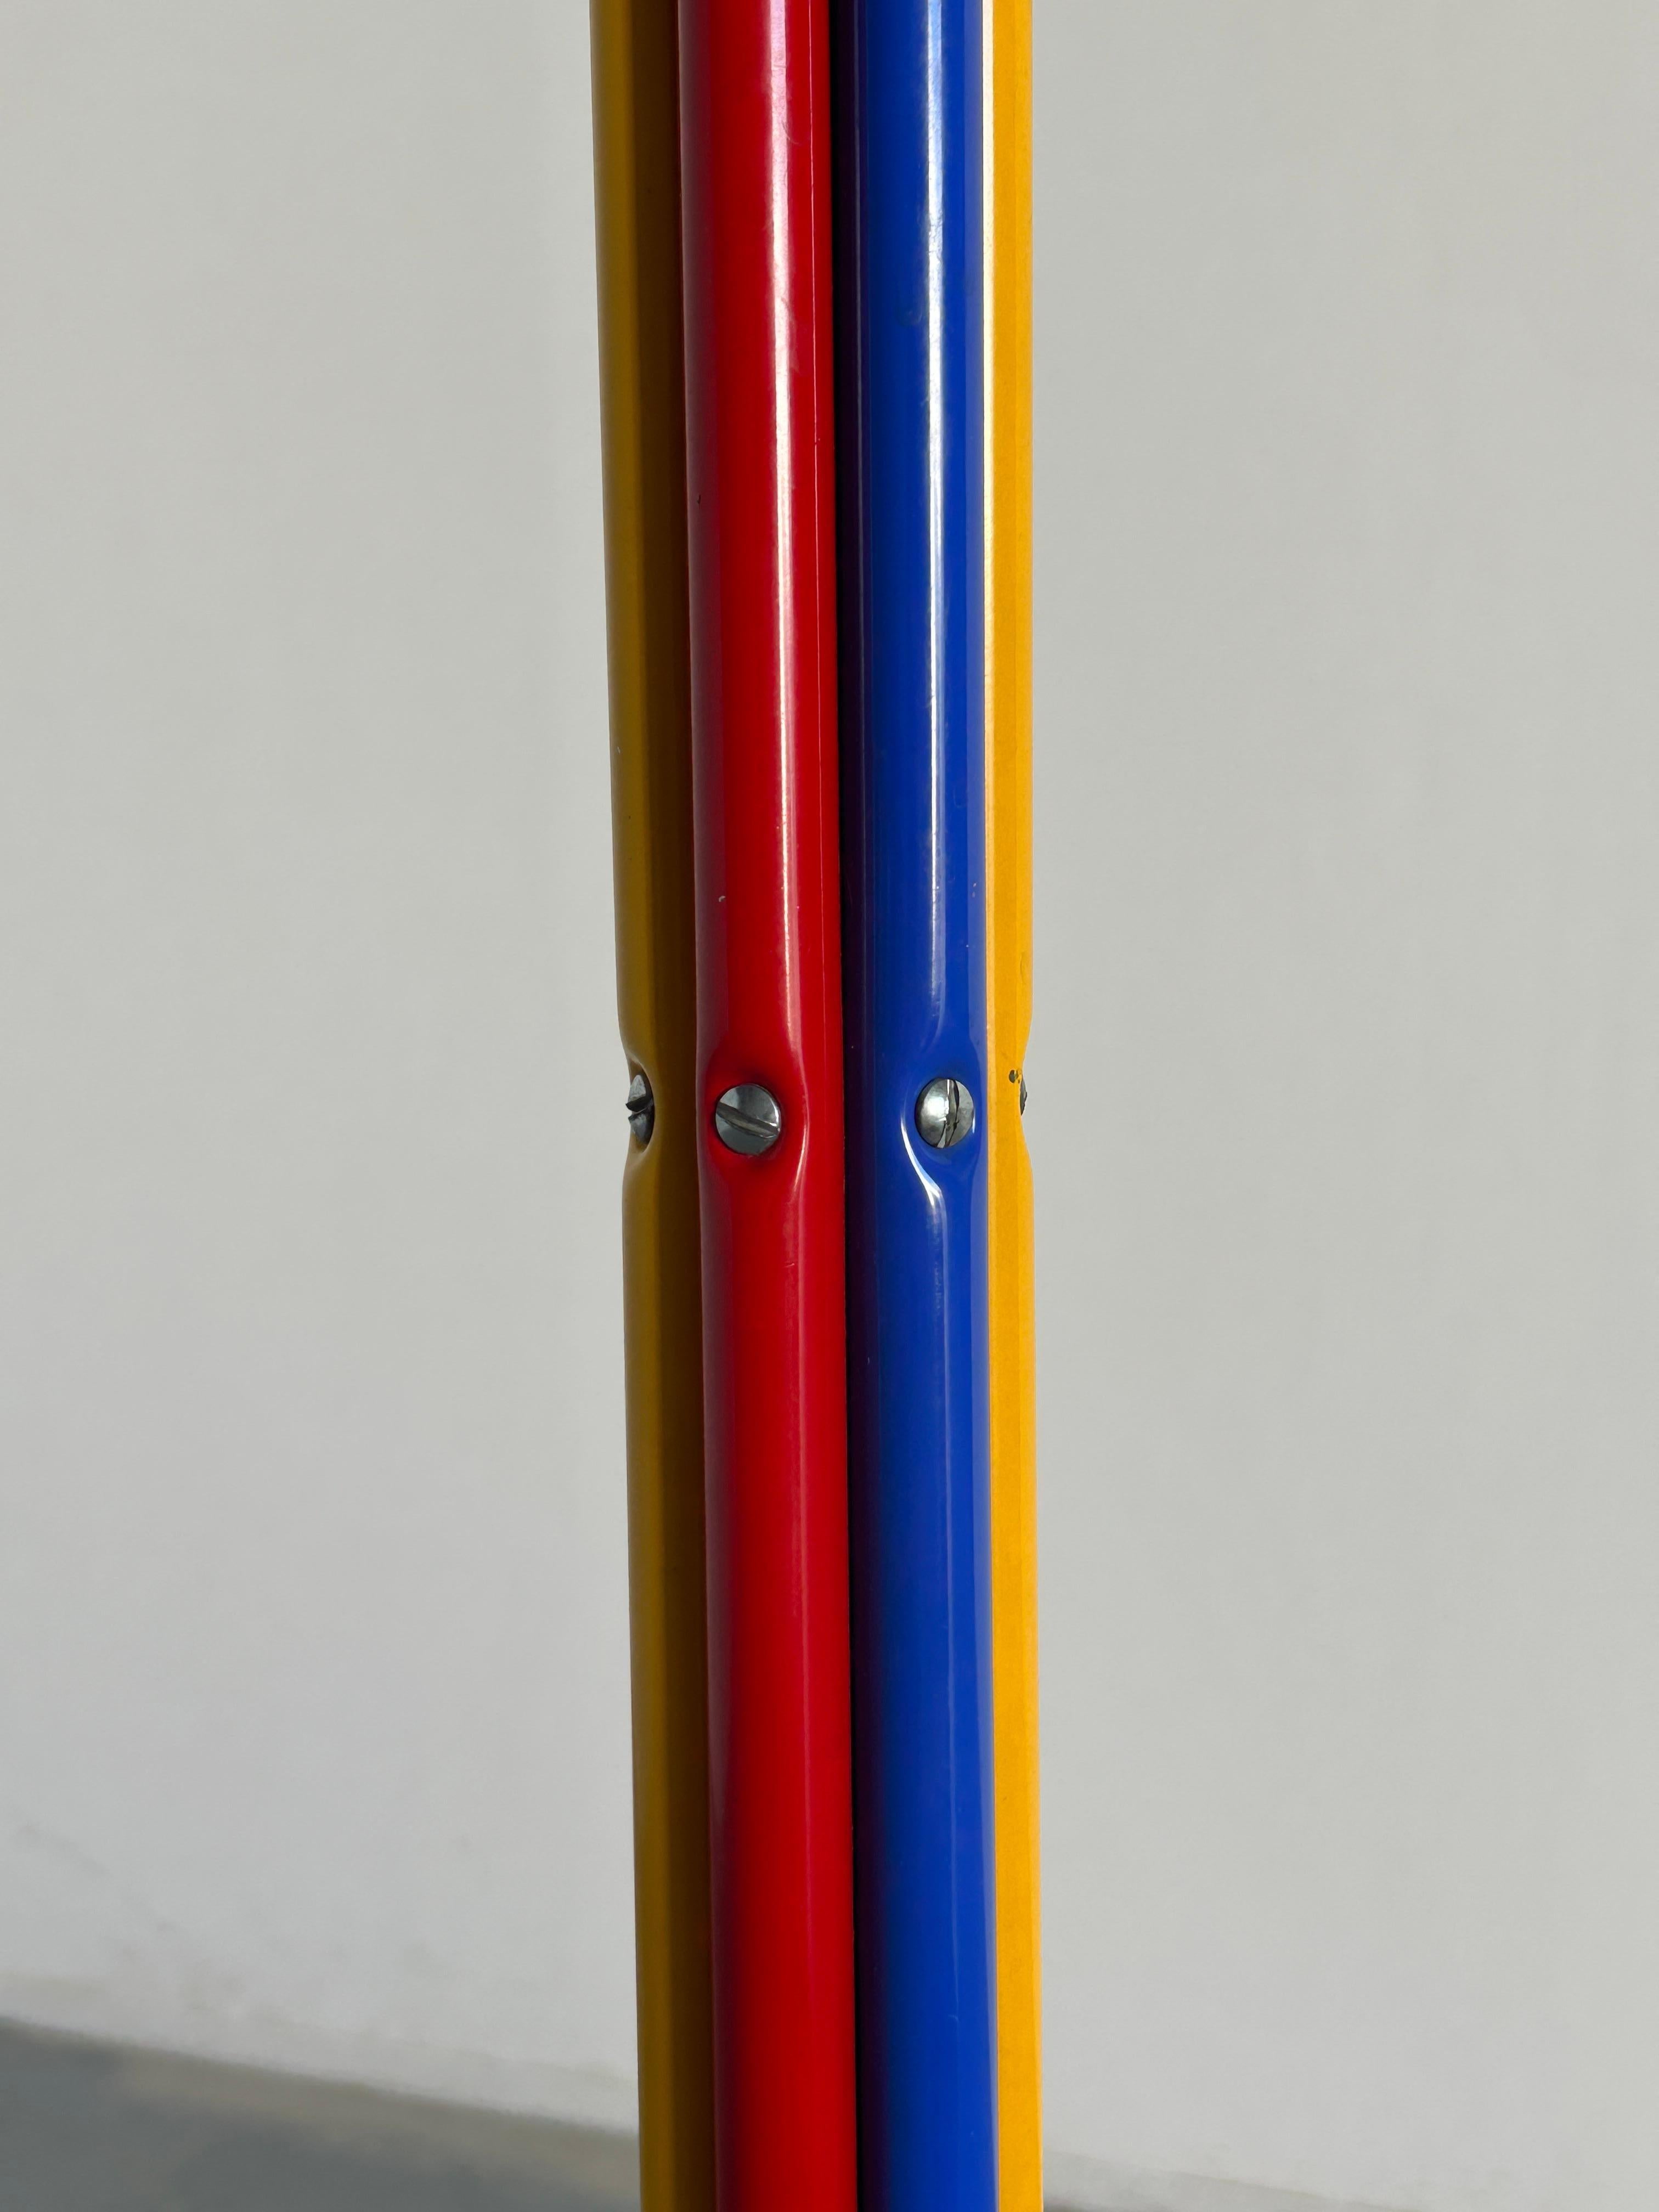 Late 20th Century Vintage Colourful Bent Metal RIGG Coat Stand by Tord Bjorklund for Ikea, 1987